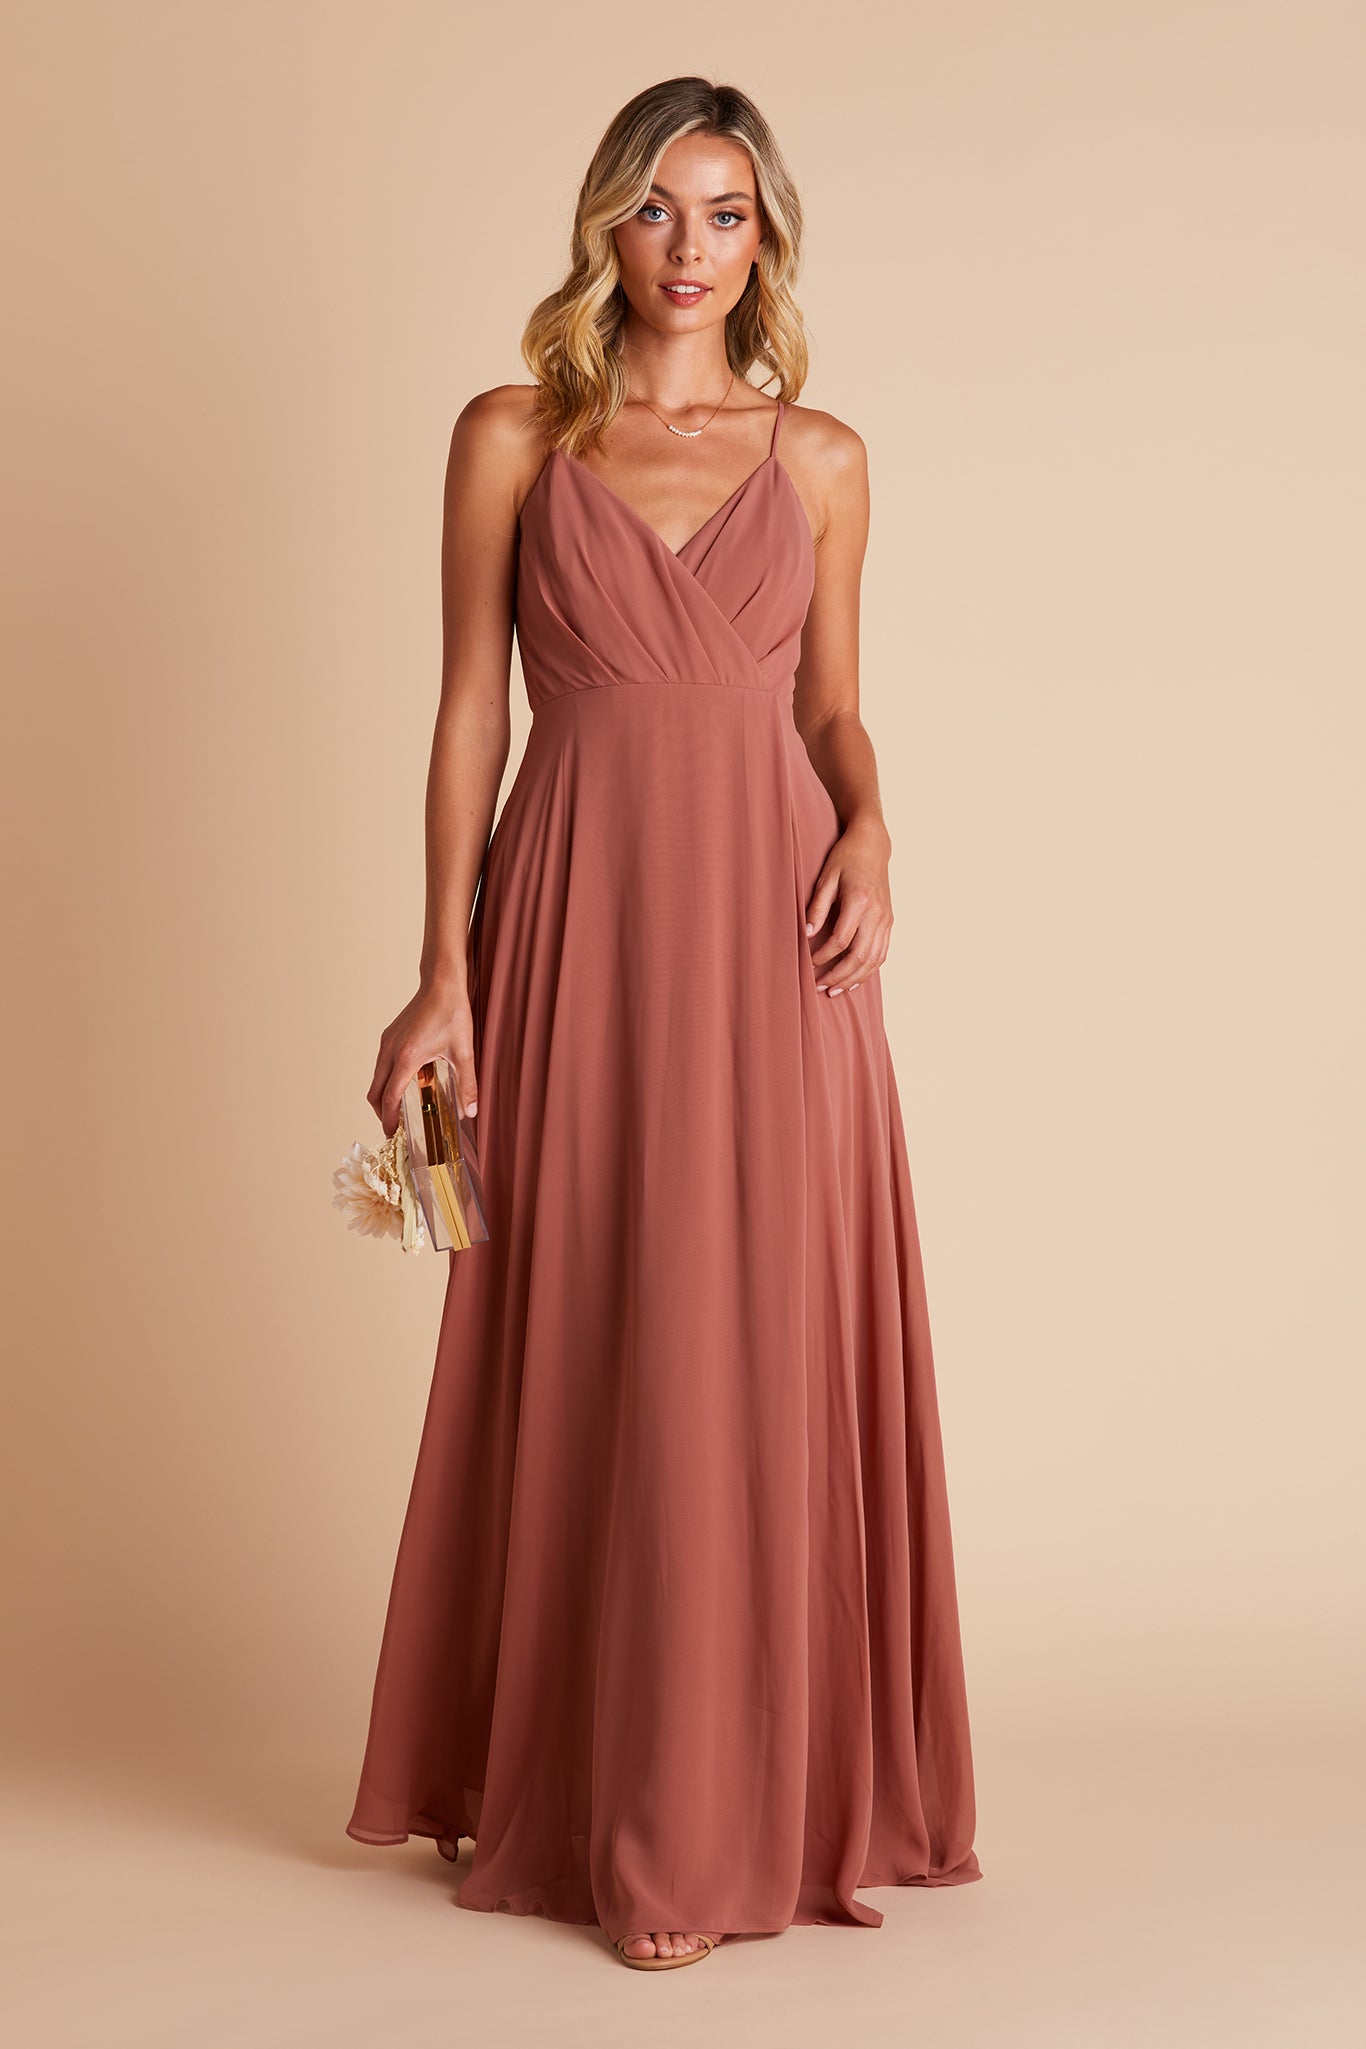 Kaia bridesmaids dress in desert rose chiffon by Birdy Grey, front view